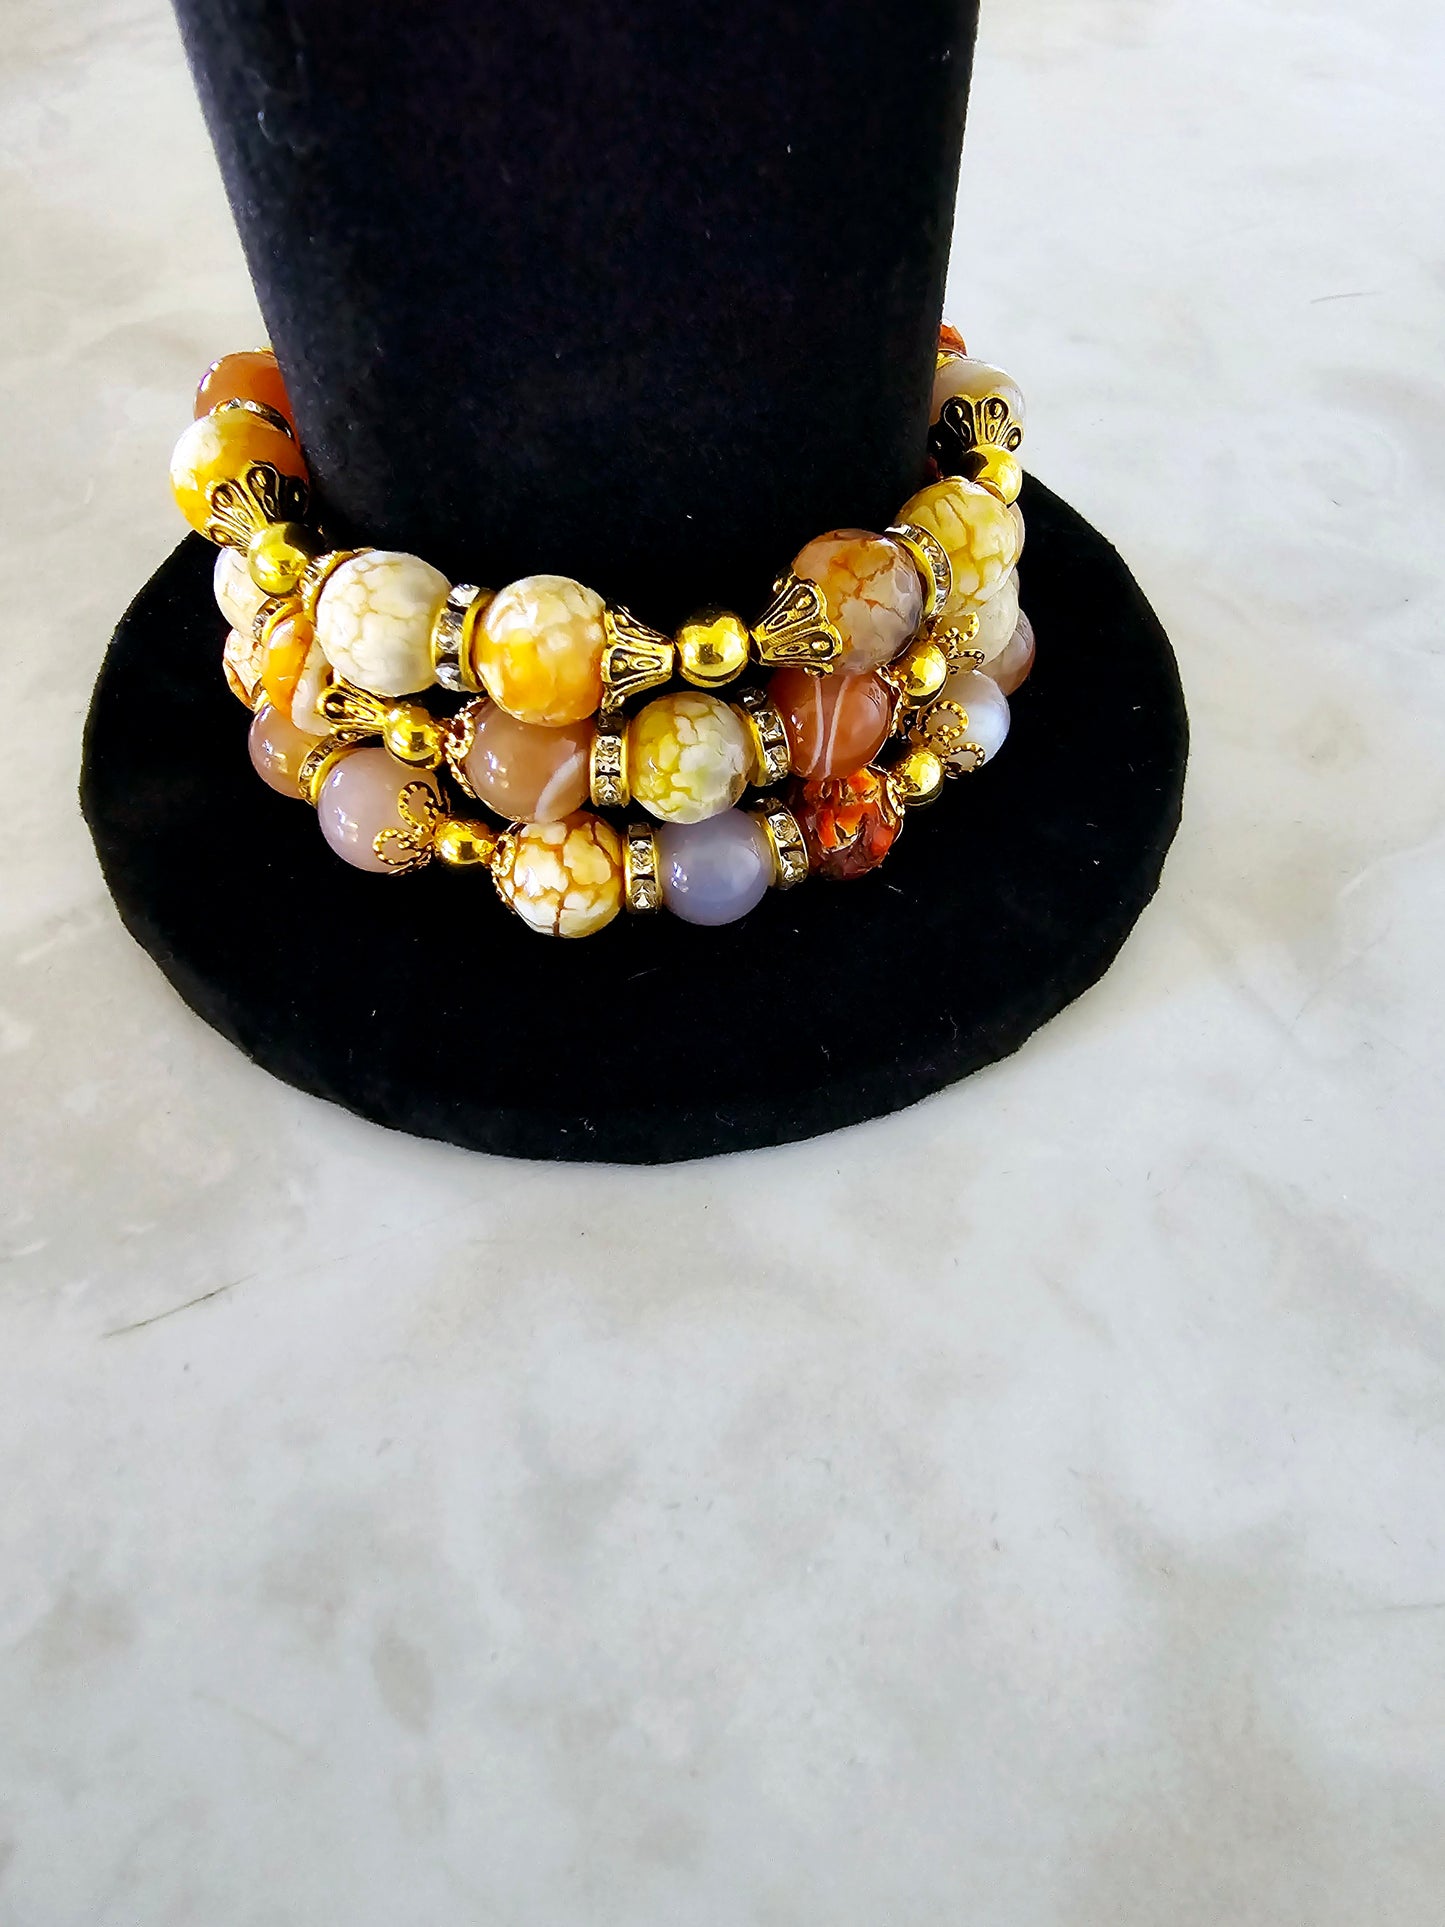 Beaded Memory Wire Bracelet Golden Glass Beads Fashion Statement Gift For Her